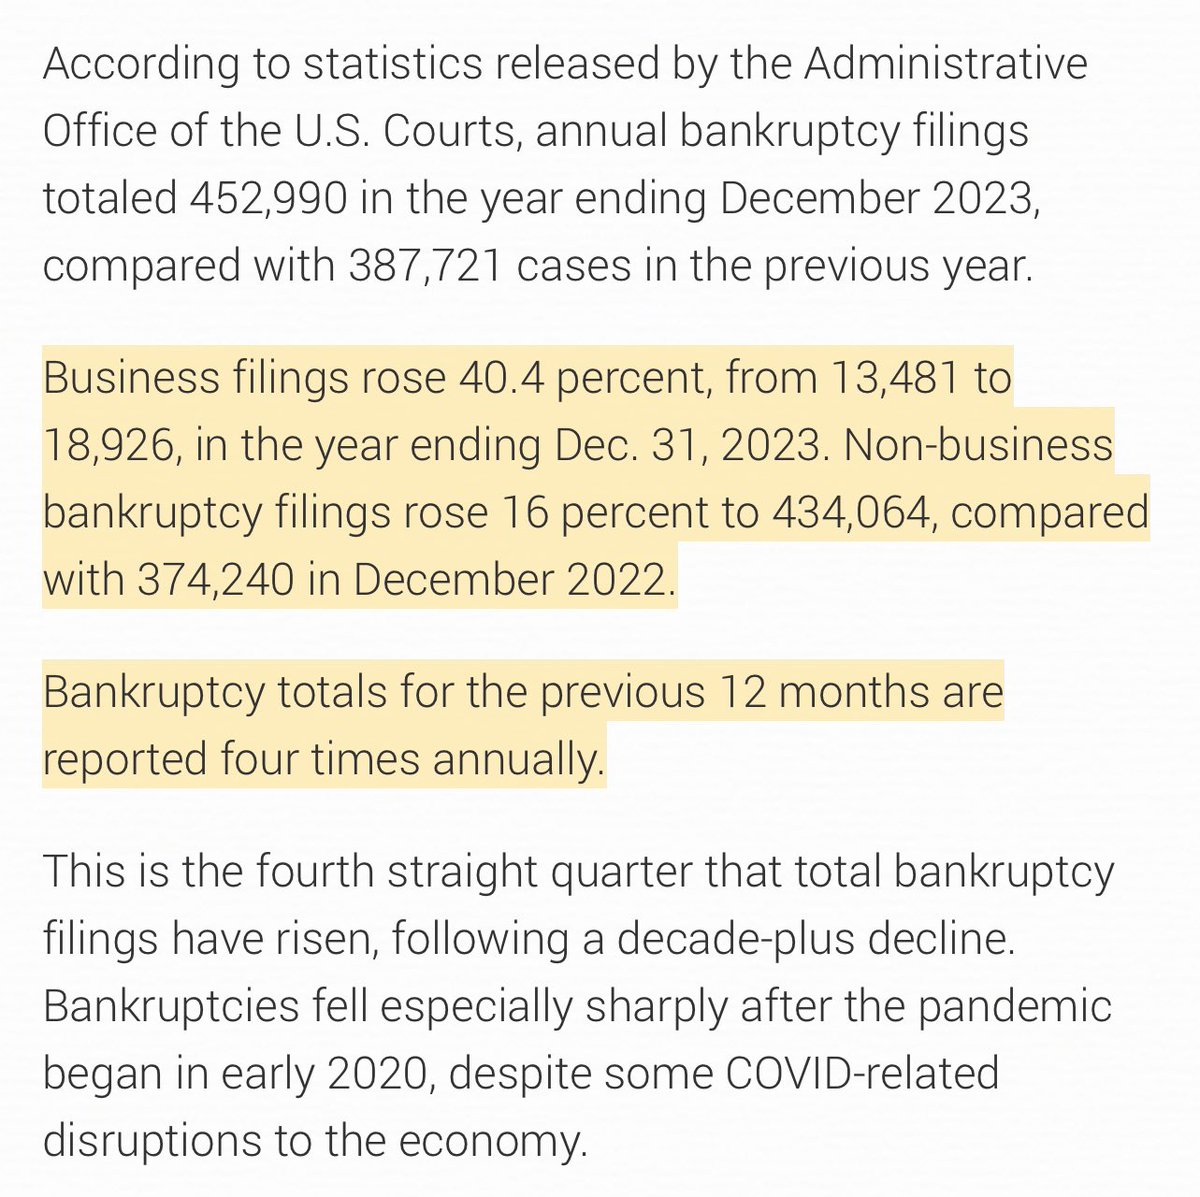 @POTUS Business bankruptcies rose over 40% in 2023. Biden can take his gaslighting and shove it.